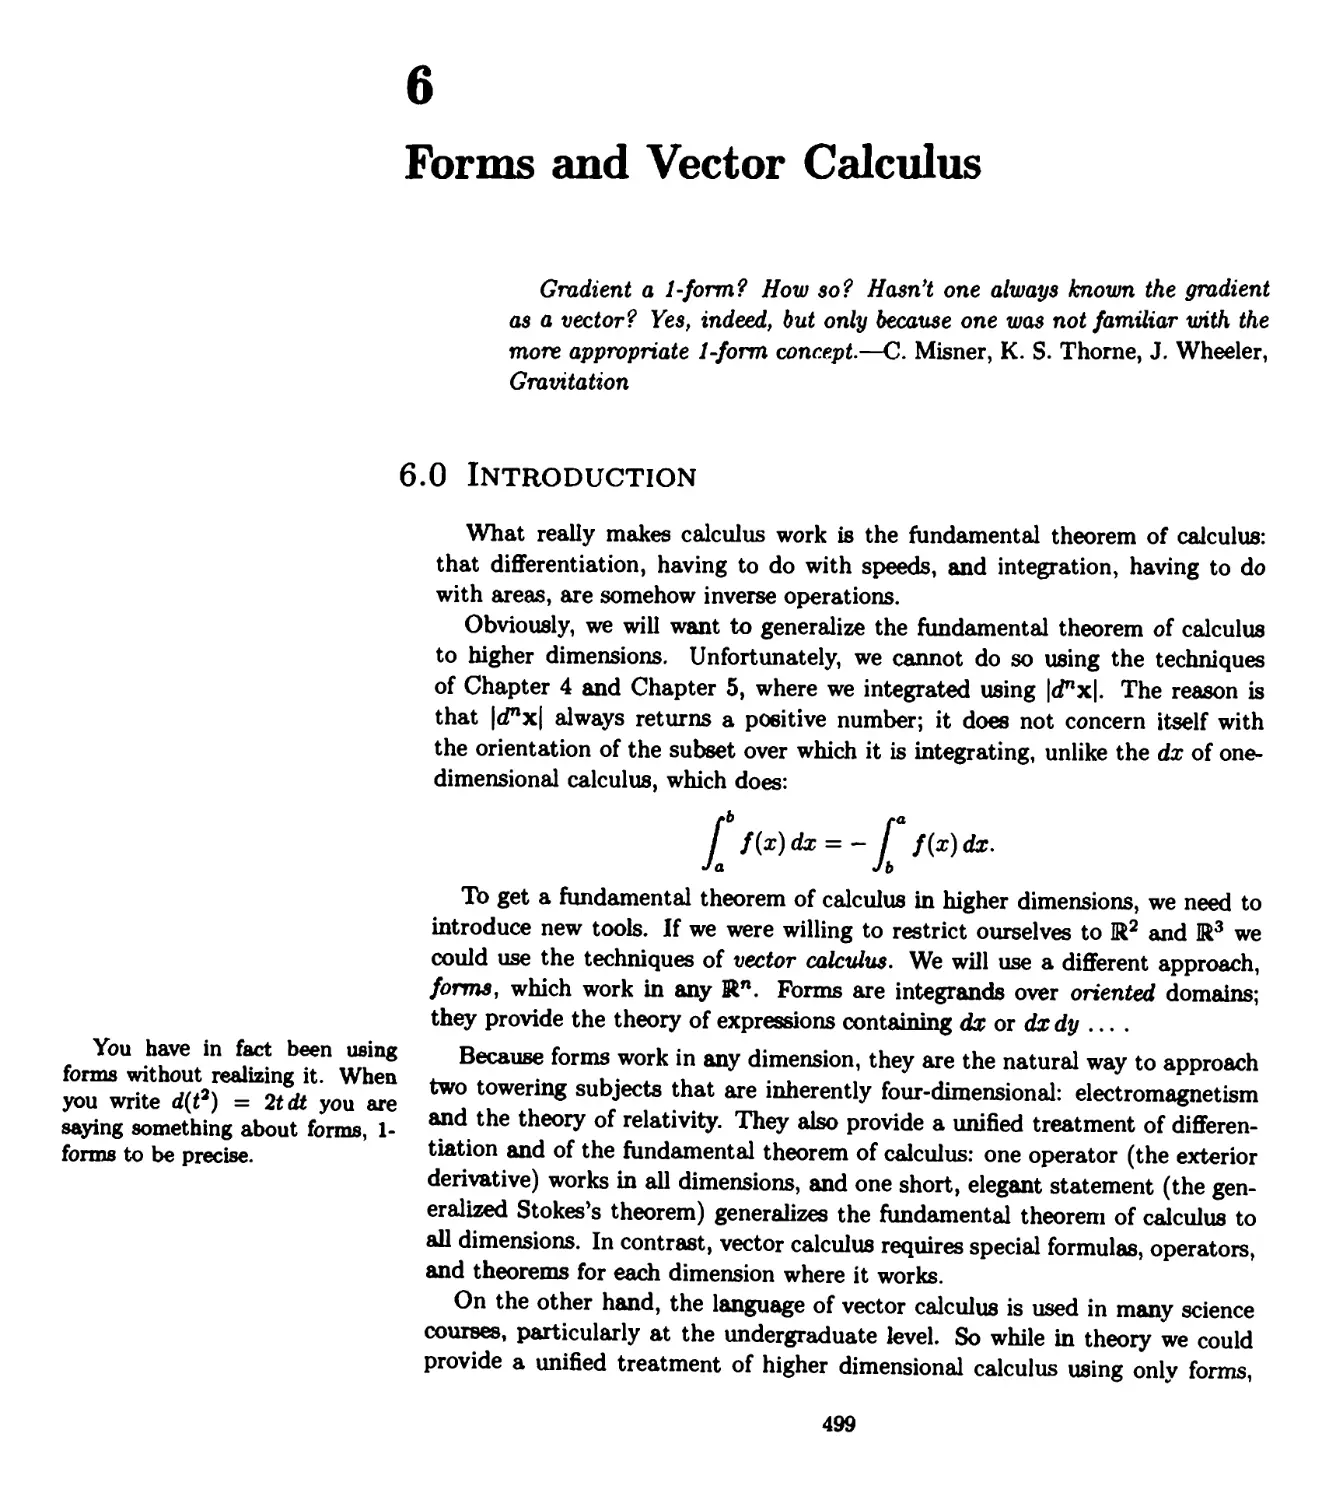 CHAPTER 6 Forms and Vector Calculus